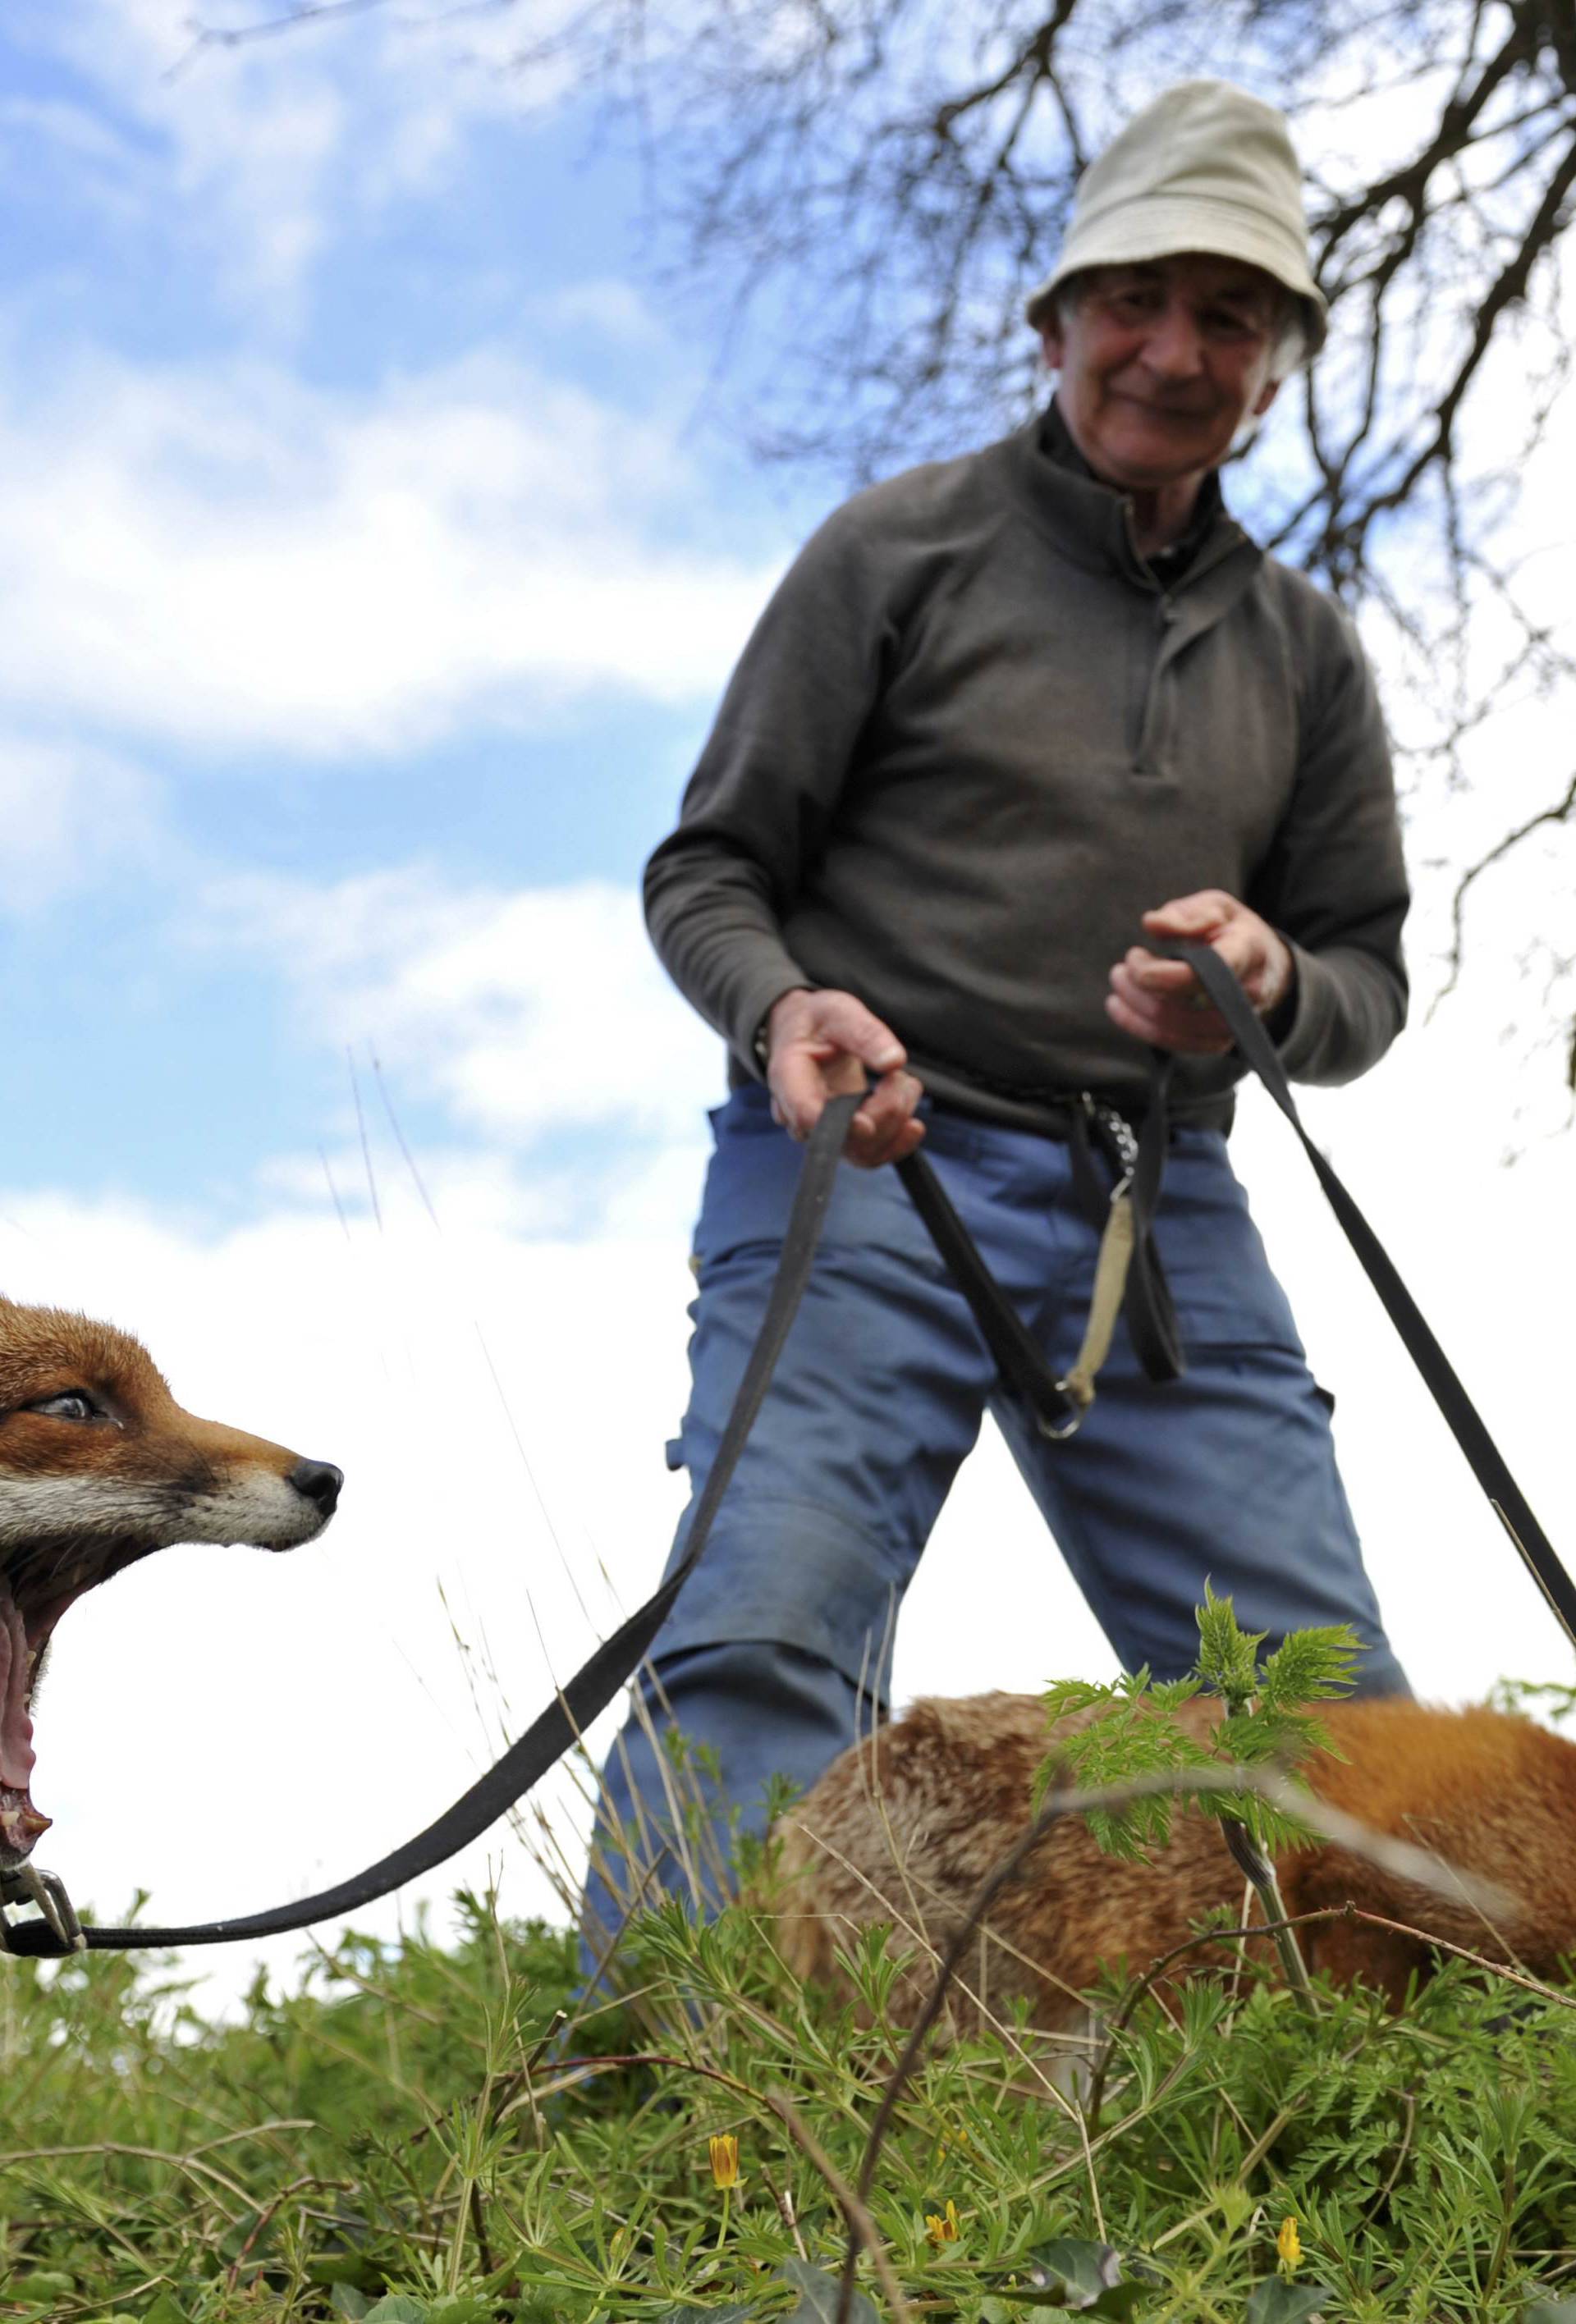 Patsy Gibbons takes his rescue foxes Grainne and Minnie for a walk in Kilkenny